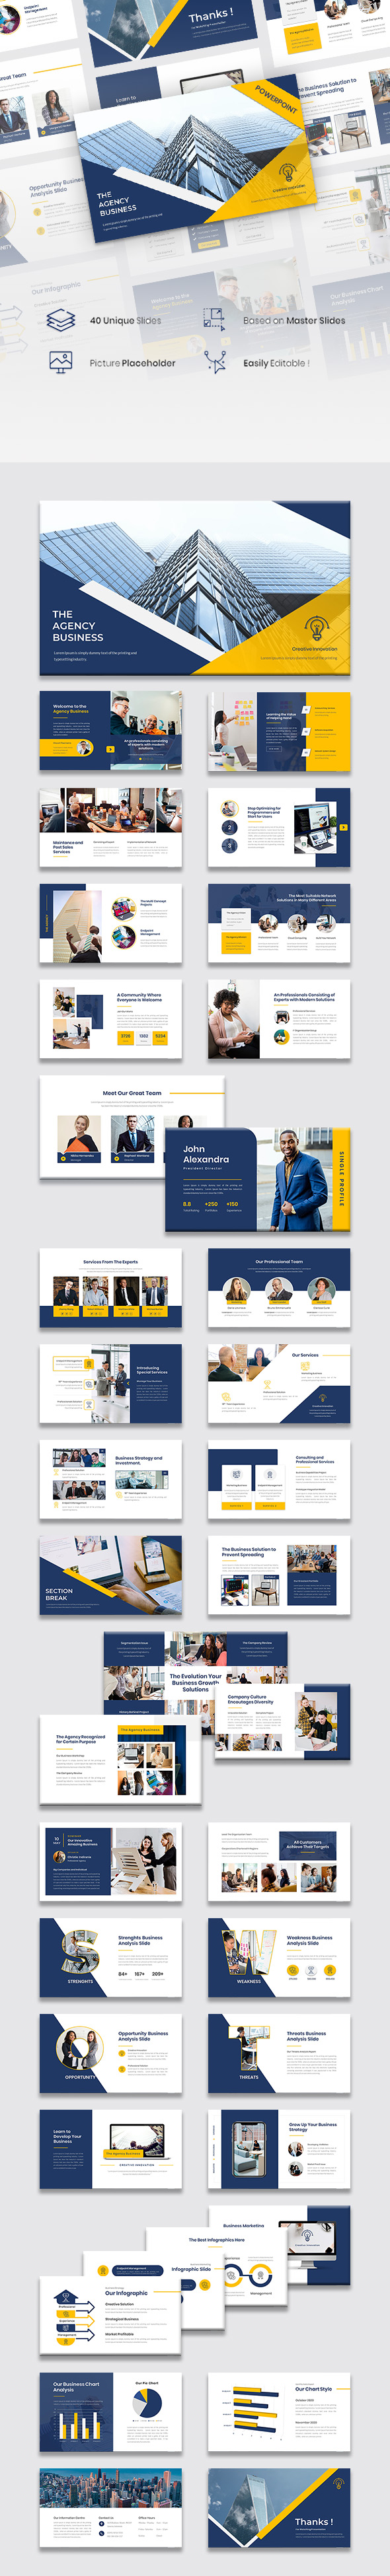 The Agency – Business Powerpoint Template